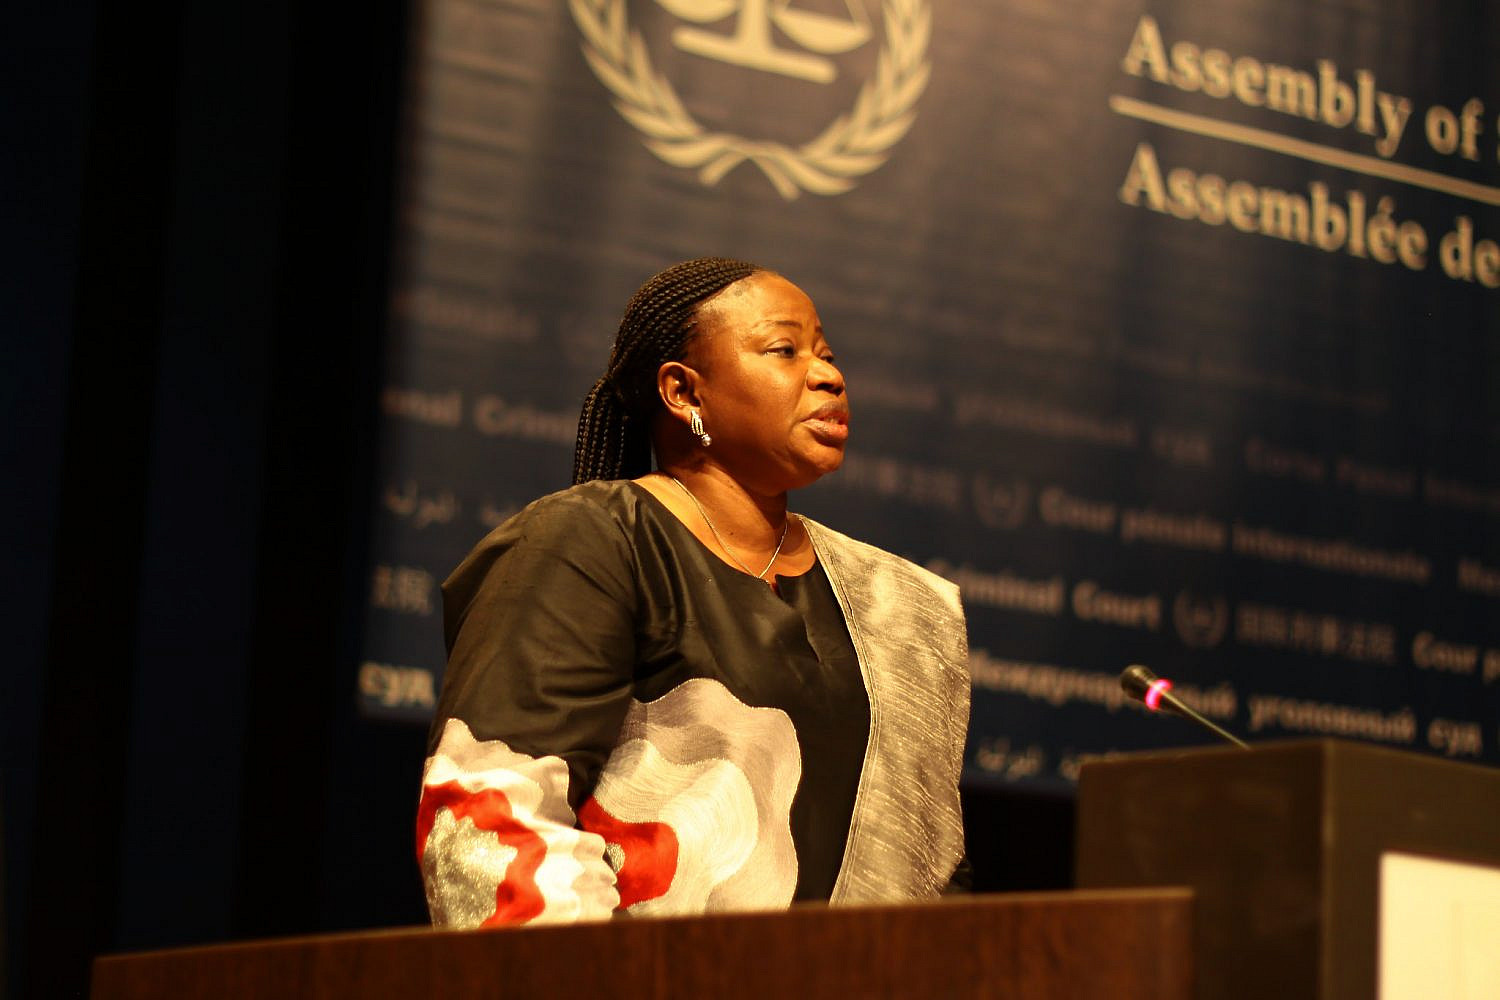 ICC Prosecutor Fatou Bensouda addresses the Coalition for the ICC Assembly in The Hague on Nov. 14, 2012. (CICC/Roberta Celi)